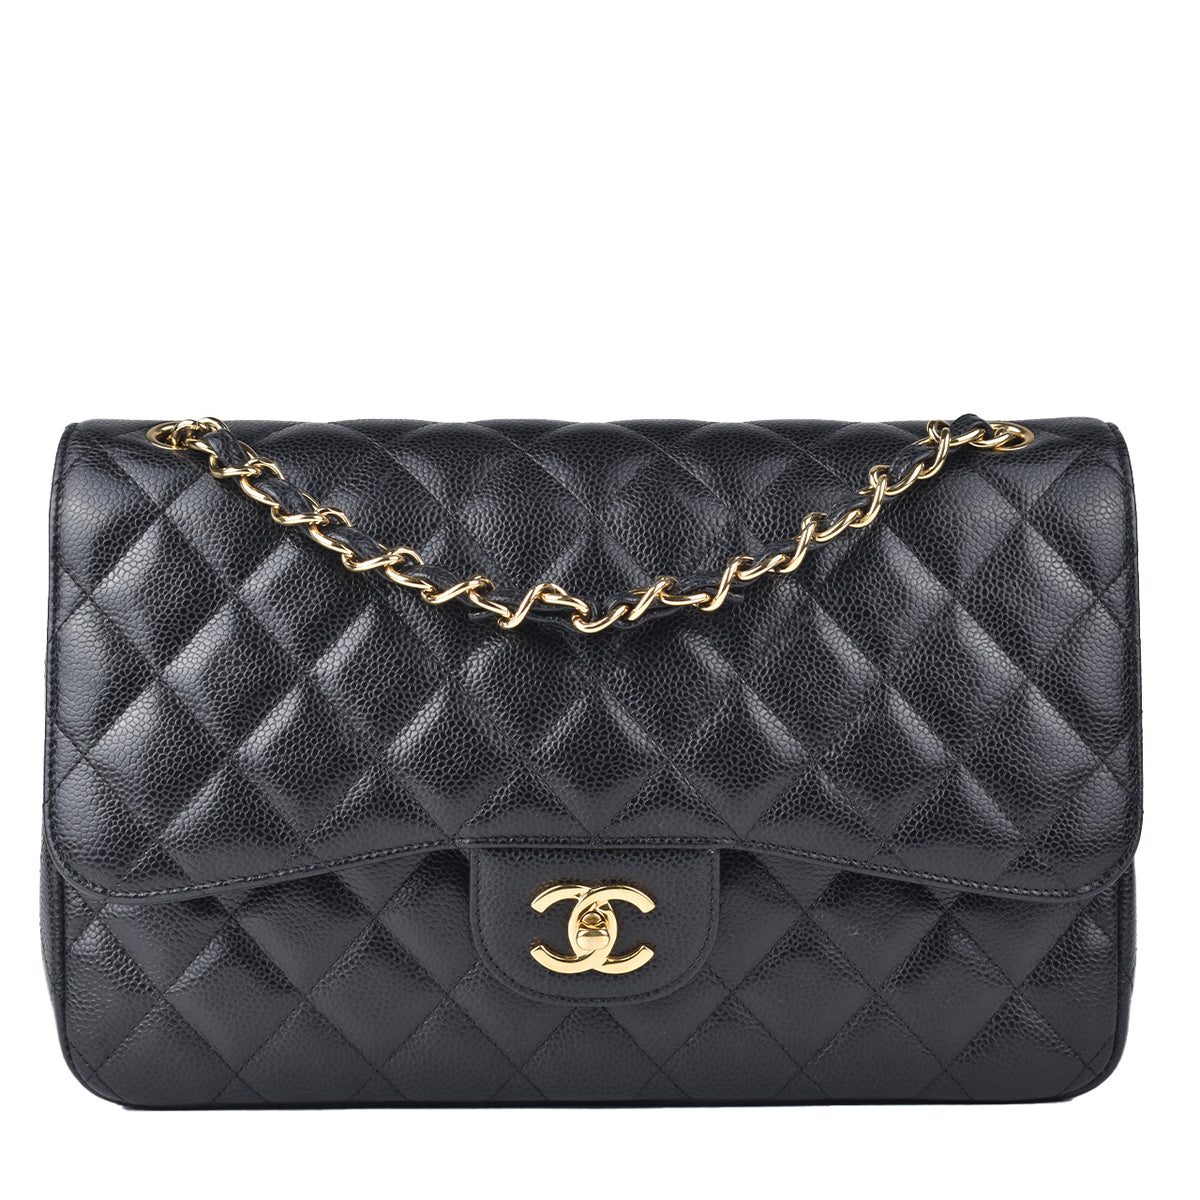 Shop CHANEL 2021-22FW Top (P71659 V14570 94305) by lufine